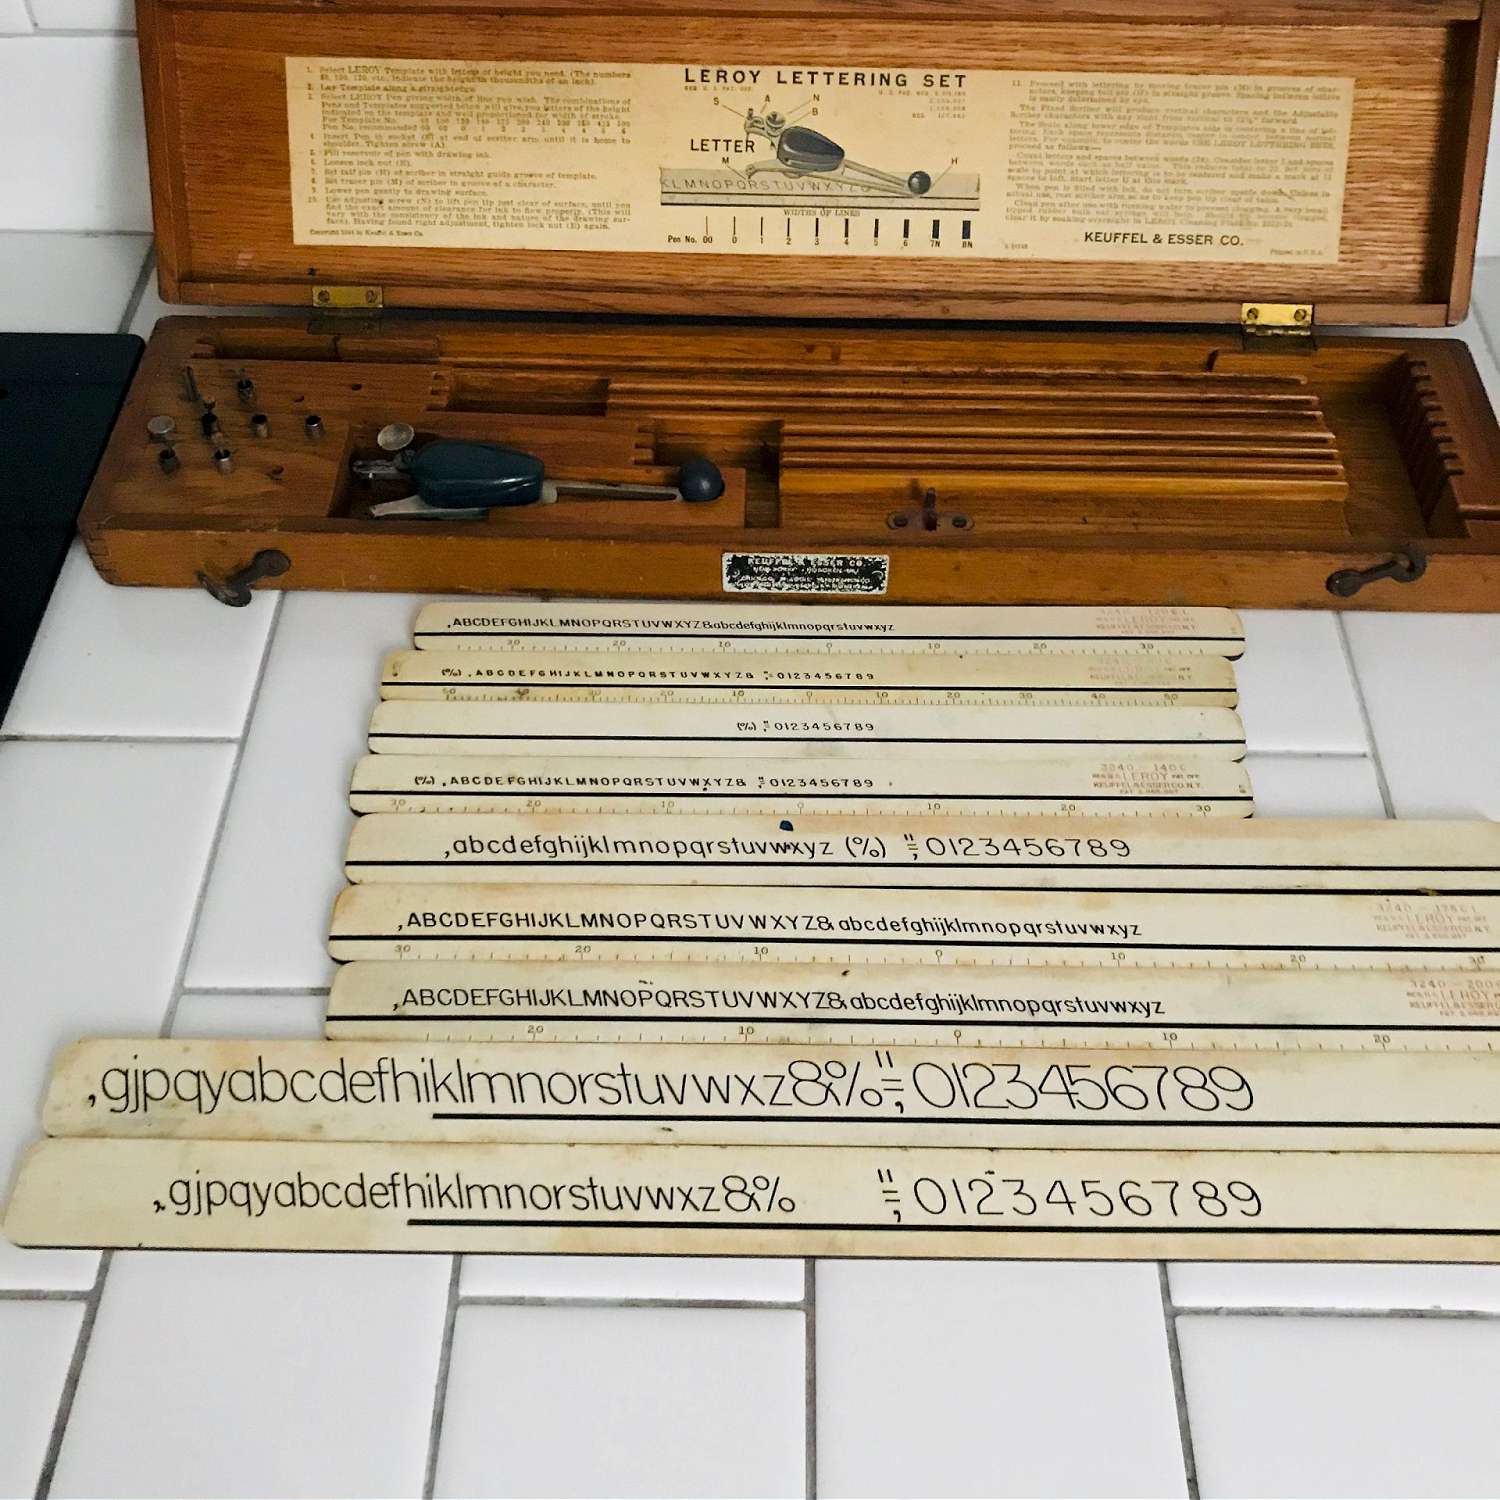 https://www.truevintageantiques.com/wp-content/uploads/2019/12/vintage-lettering-kit-leroy-lettering-set-keuffel-esser-new-york-1944-template-farmhouse-office-collectible-display-5df1190e7-scaled.jpg